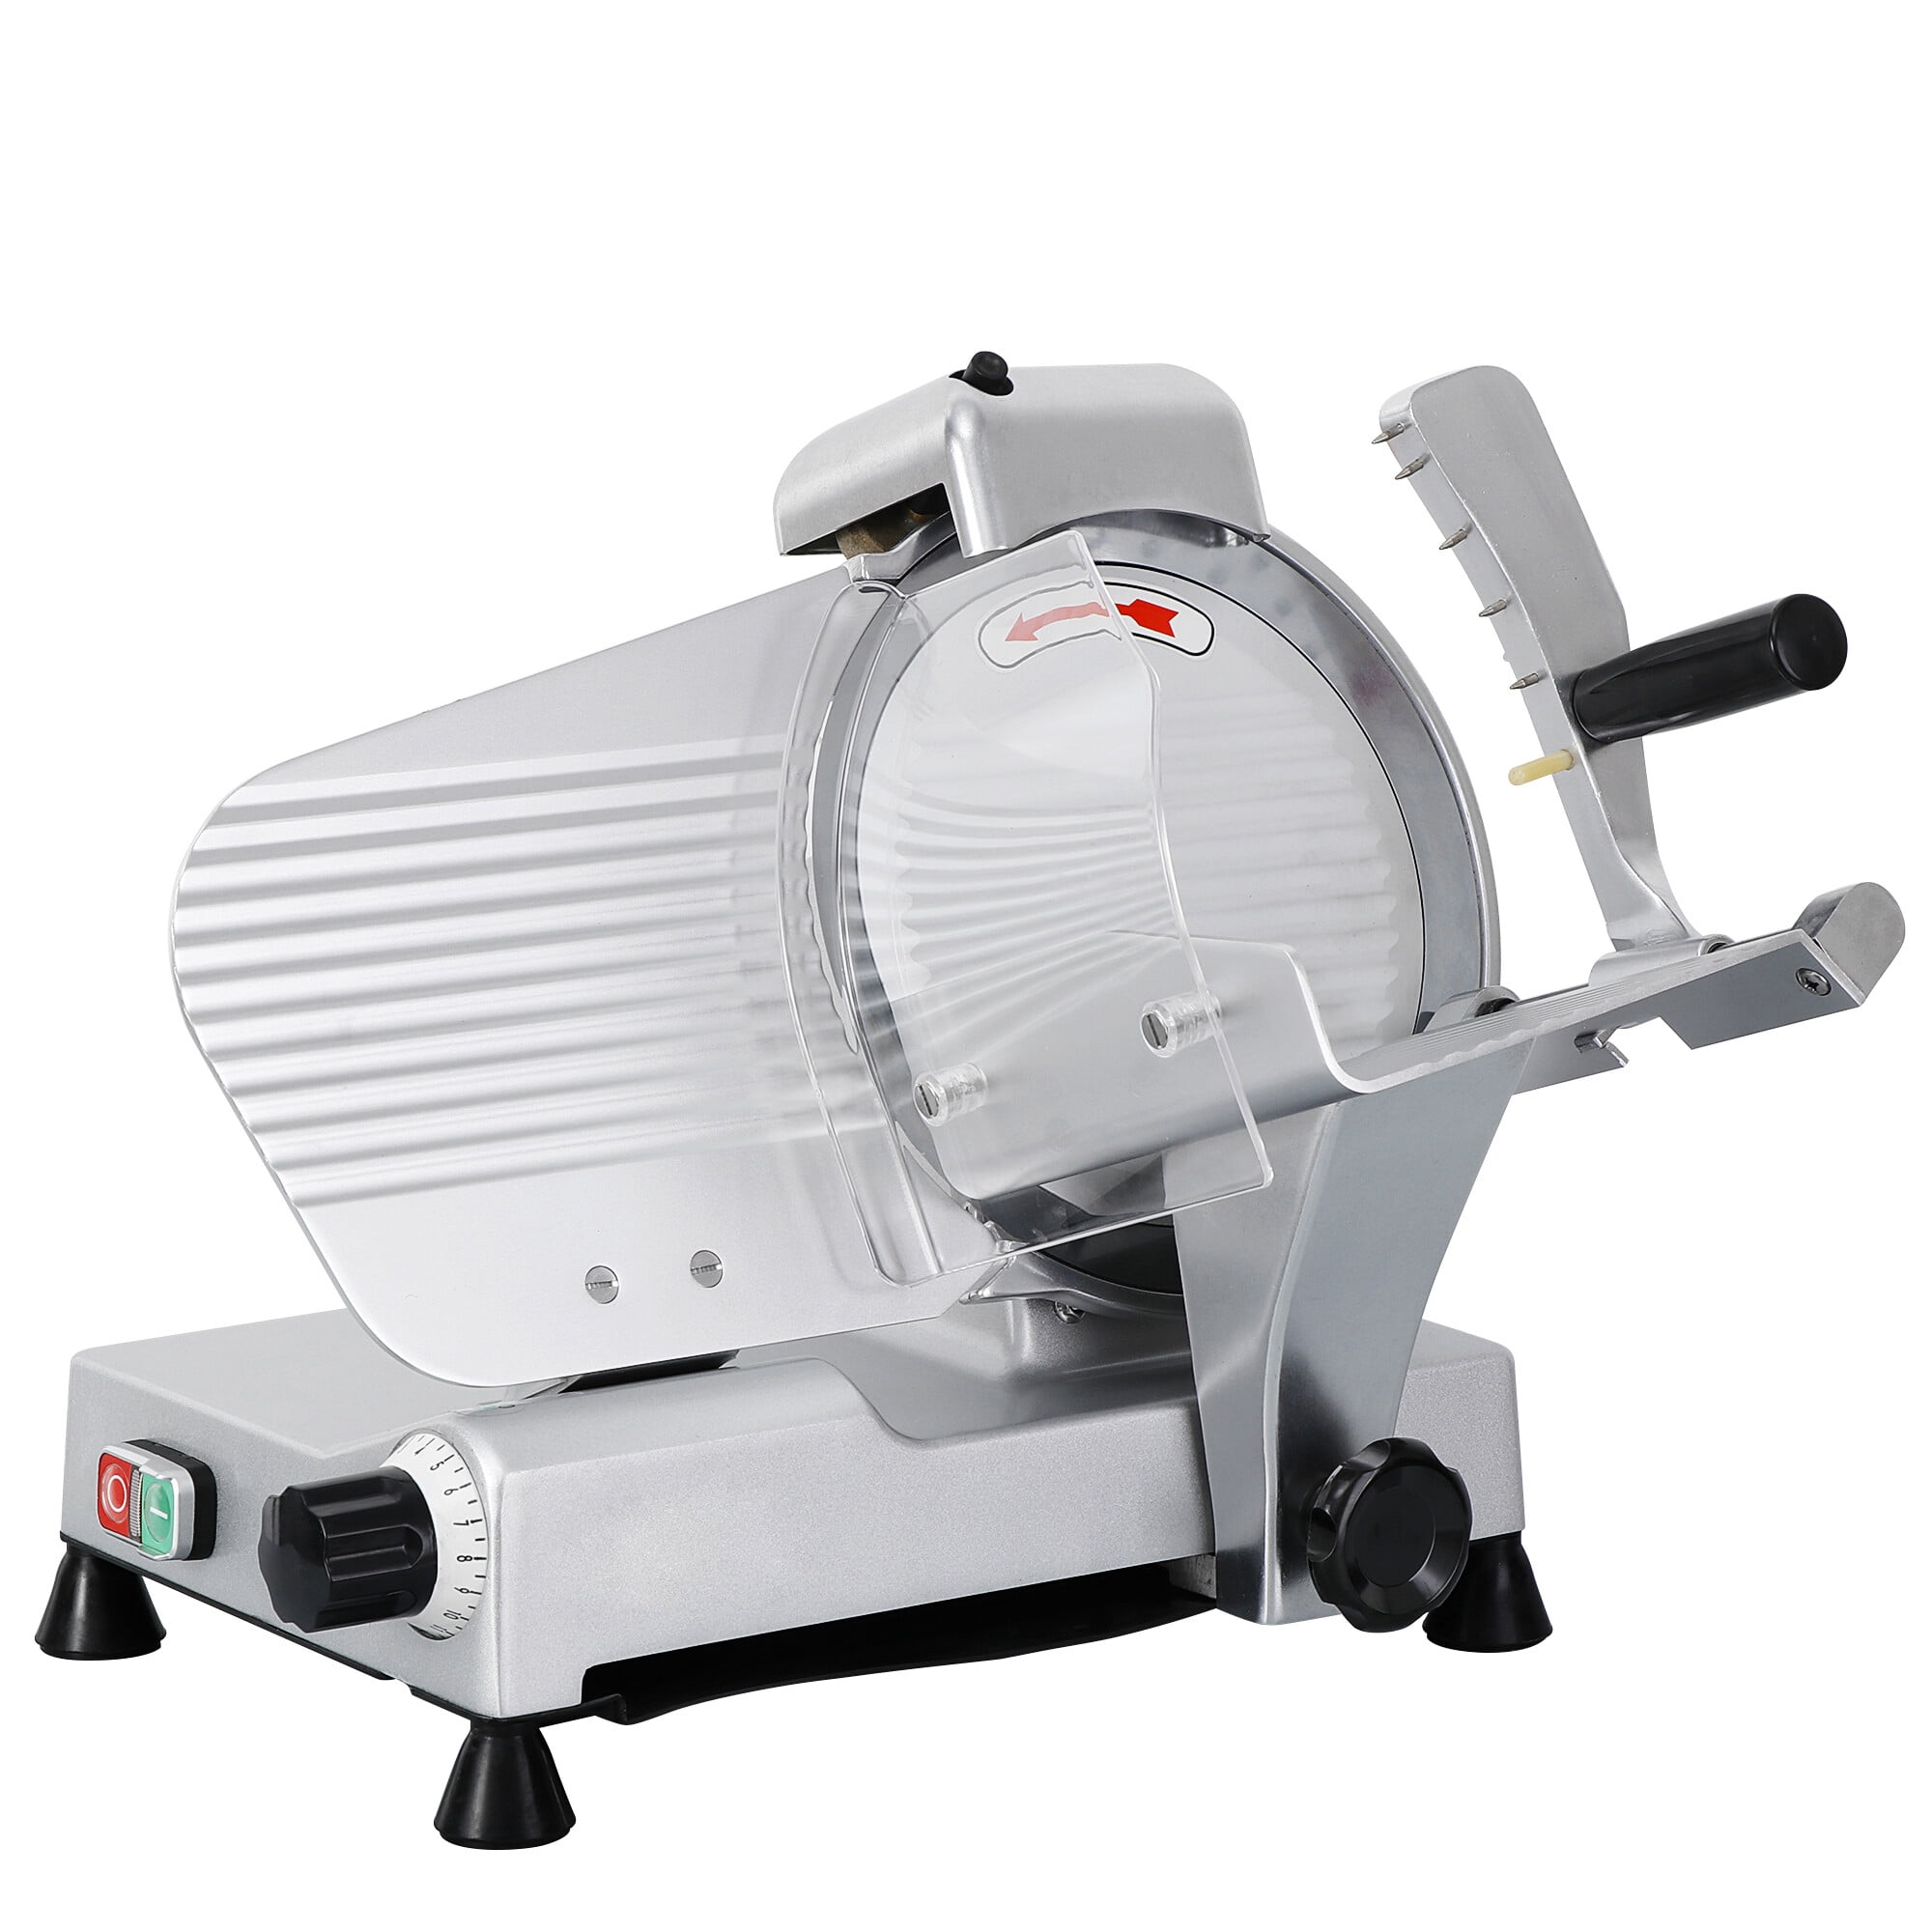 Electric Meat Slicer Stainless Steel 10'' Blade Bread Cutter Deli Food Machine 